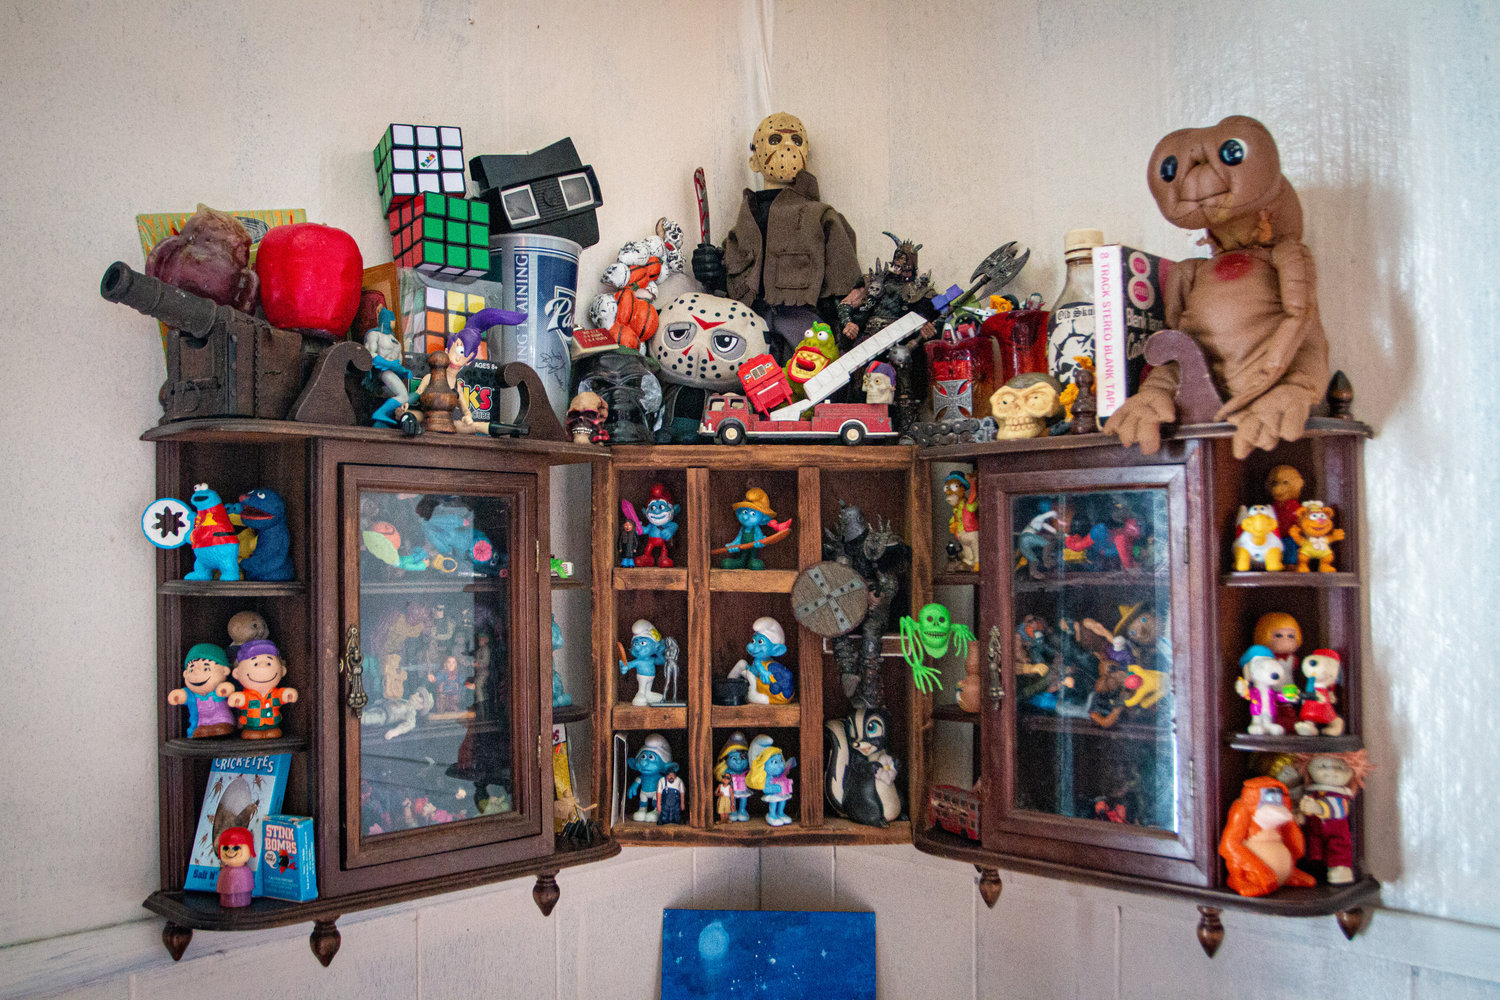 This cabinet is covered in vintage toys and childhood memorabilia, from E.T. to Snoopy and many others.